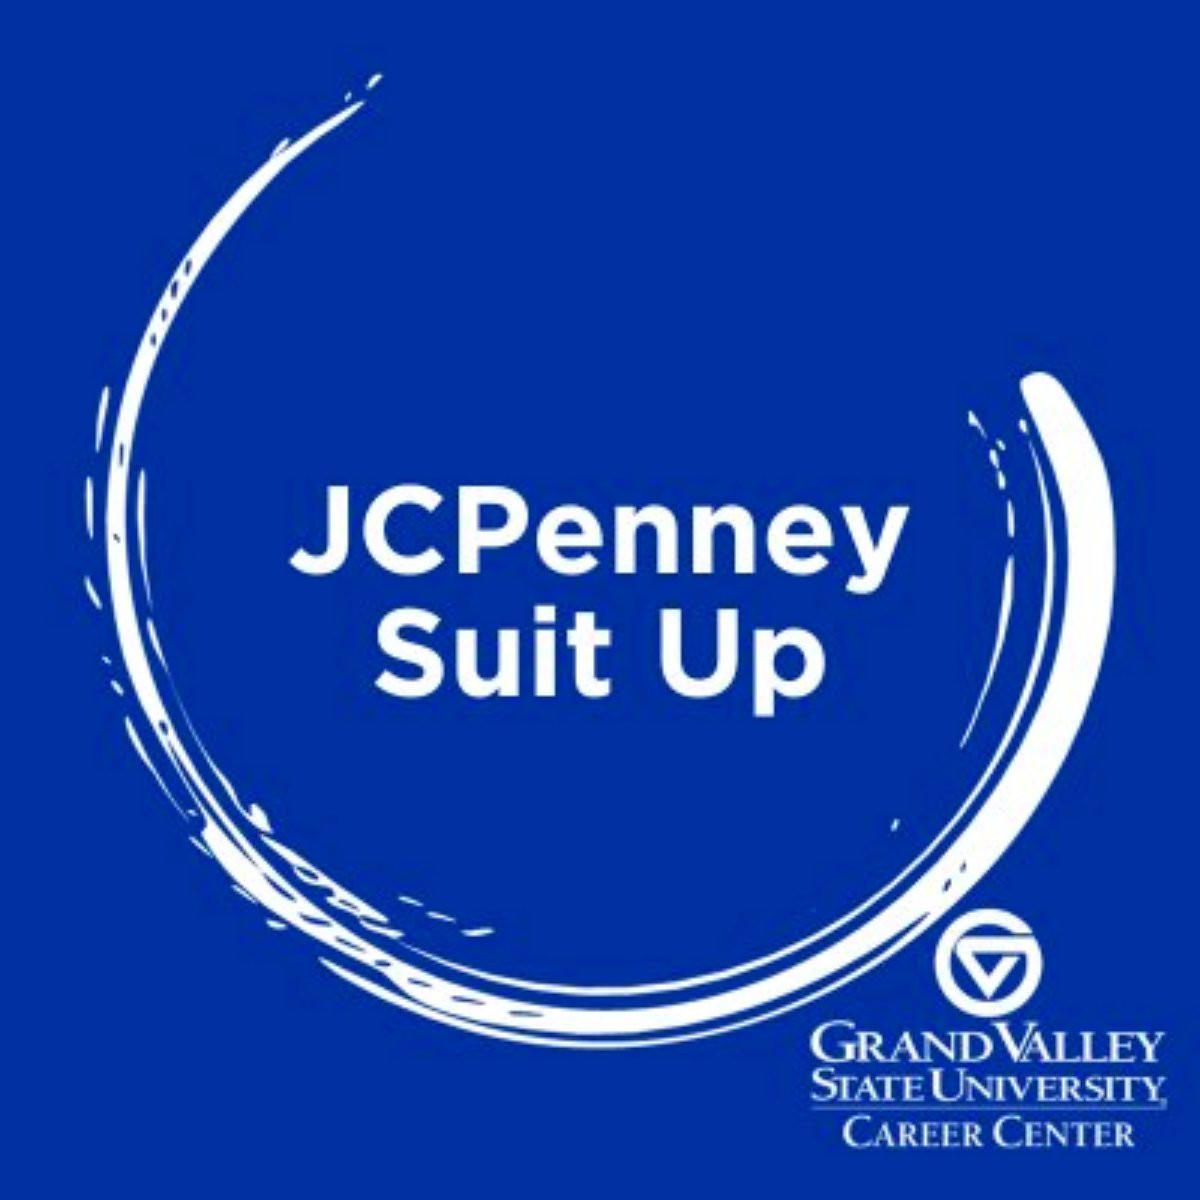 A blue background with white text that says JCPenney Suit Up with a white swirl and the Grand Valley State University Career Center logo